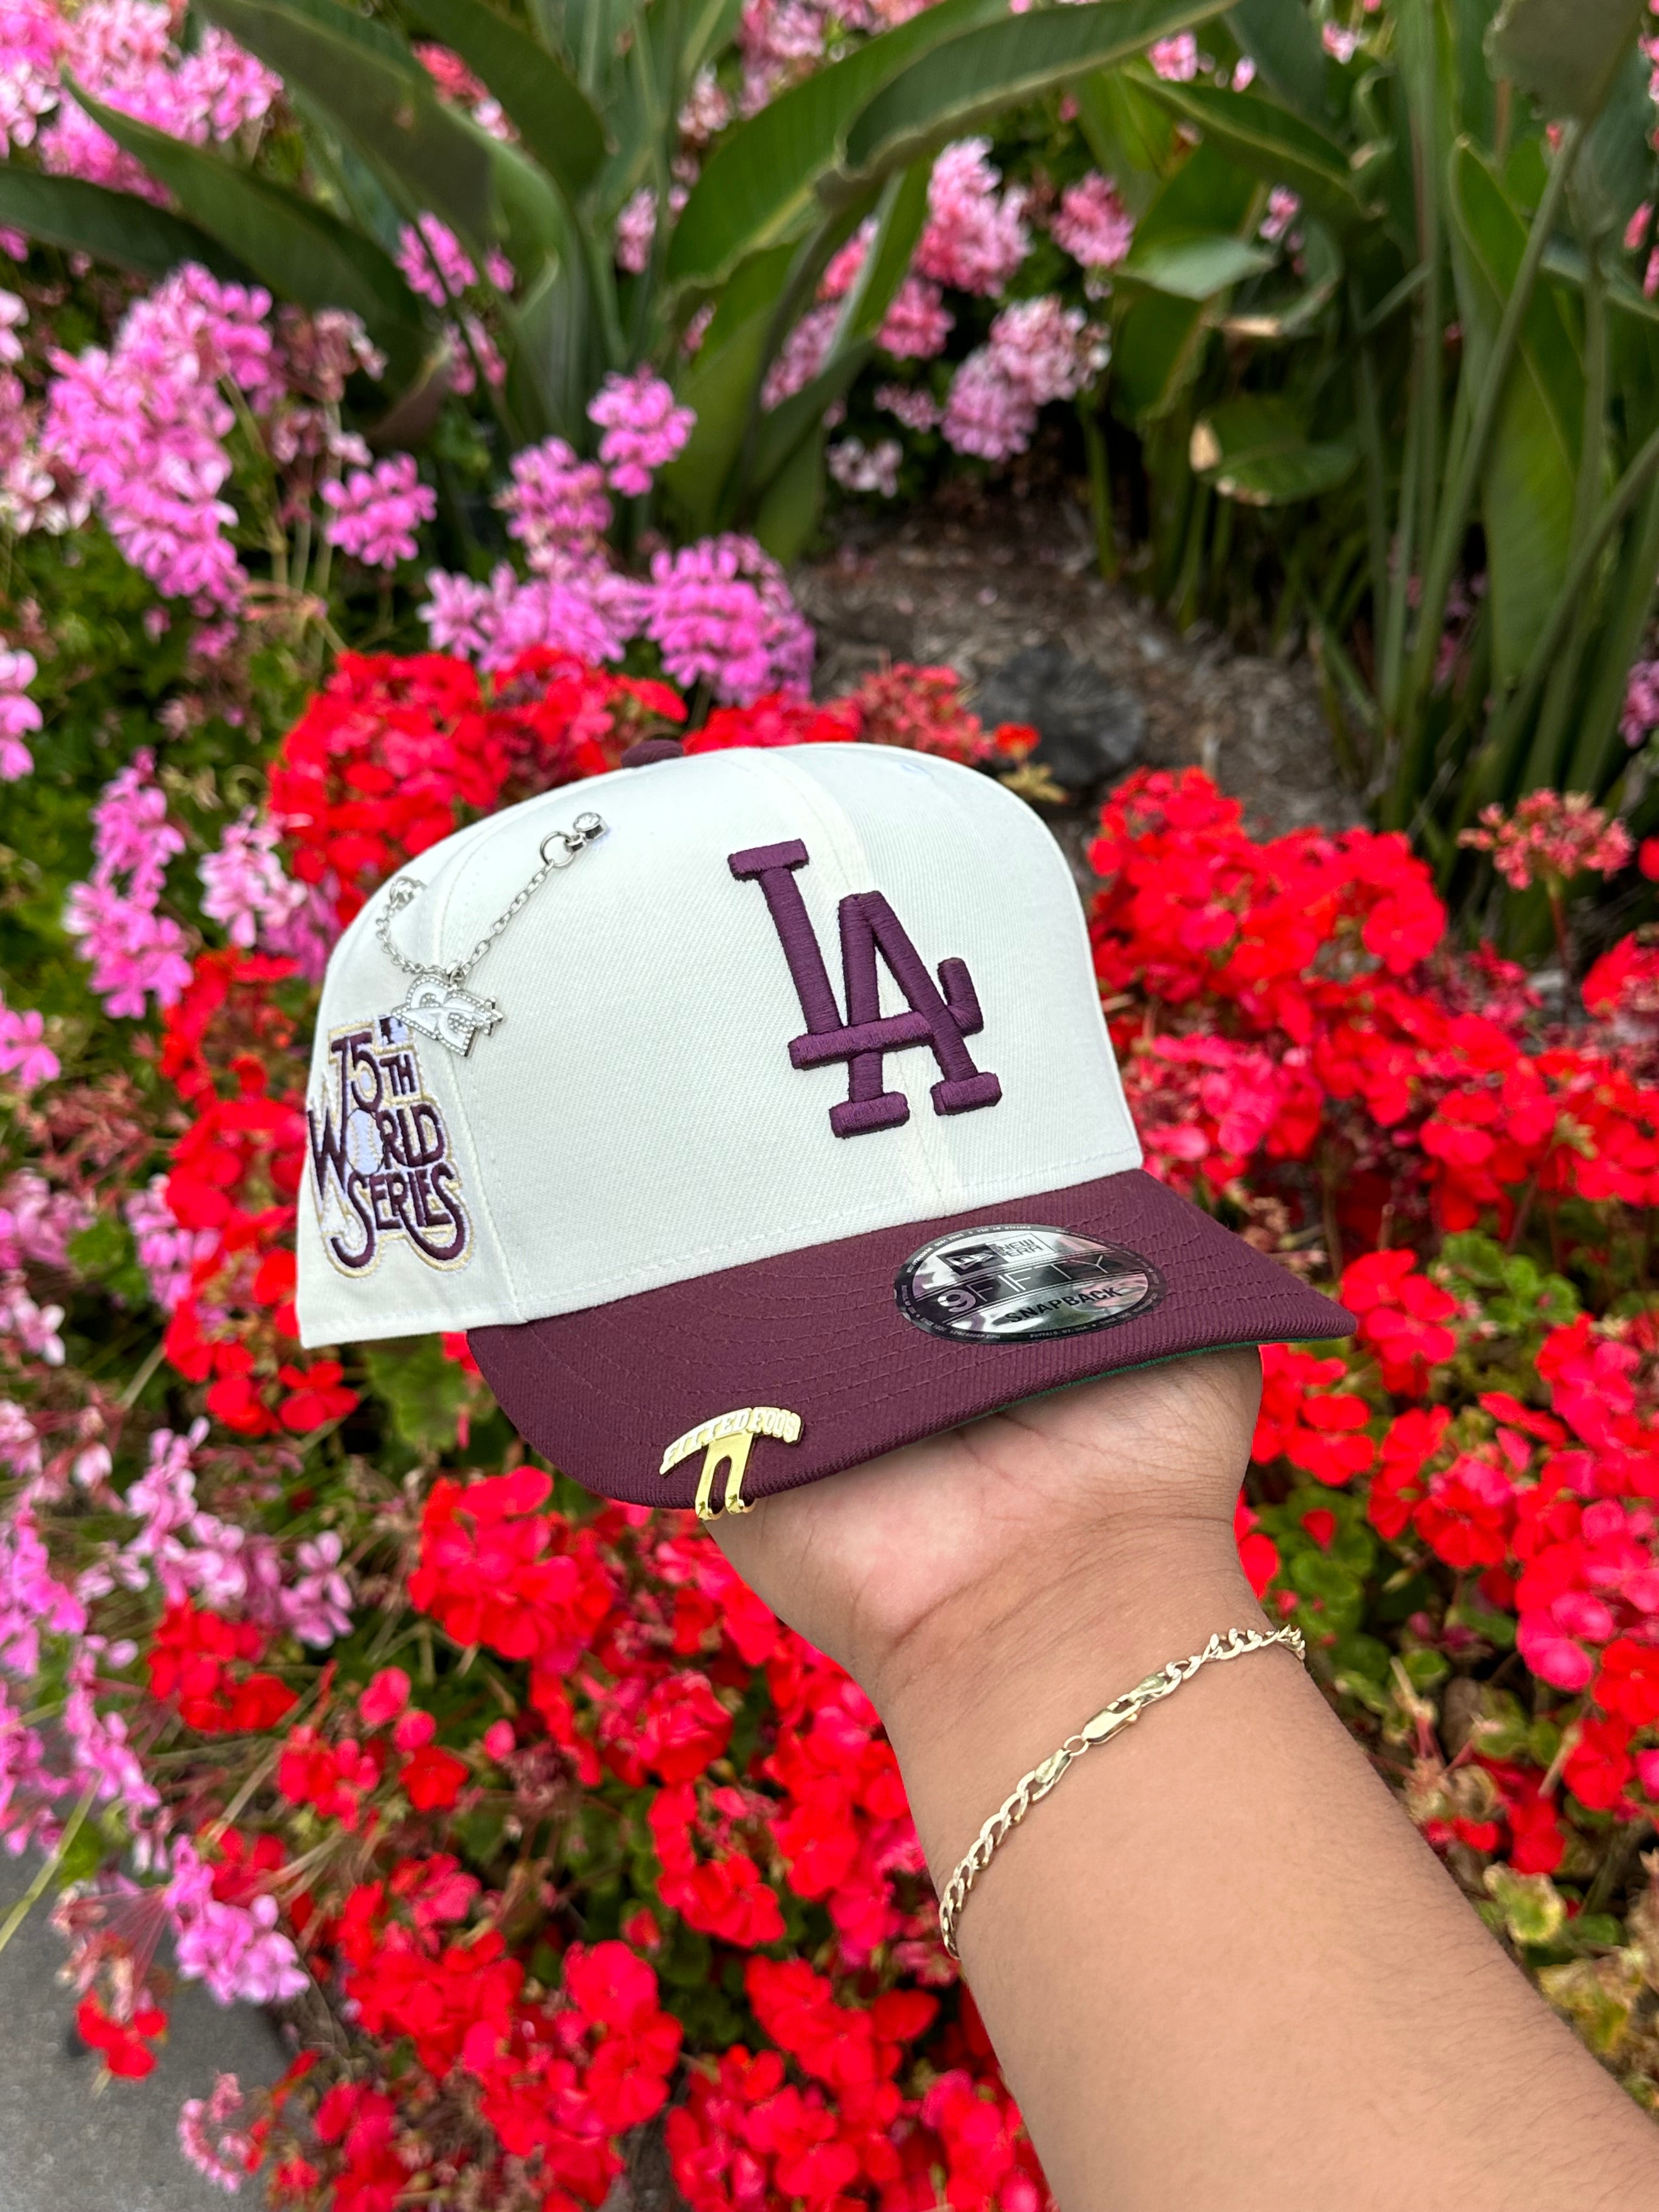 NEW ERA EXCLUSIVE 9FIFTY CHROME WHITE/BURGUNDY LOS ANGELES DODGERS SNAPBACK W/ 75TH WORLD SERIES PATCH